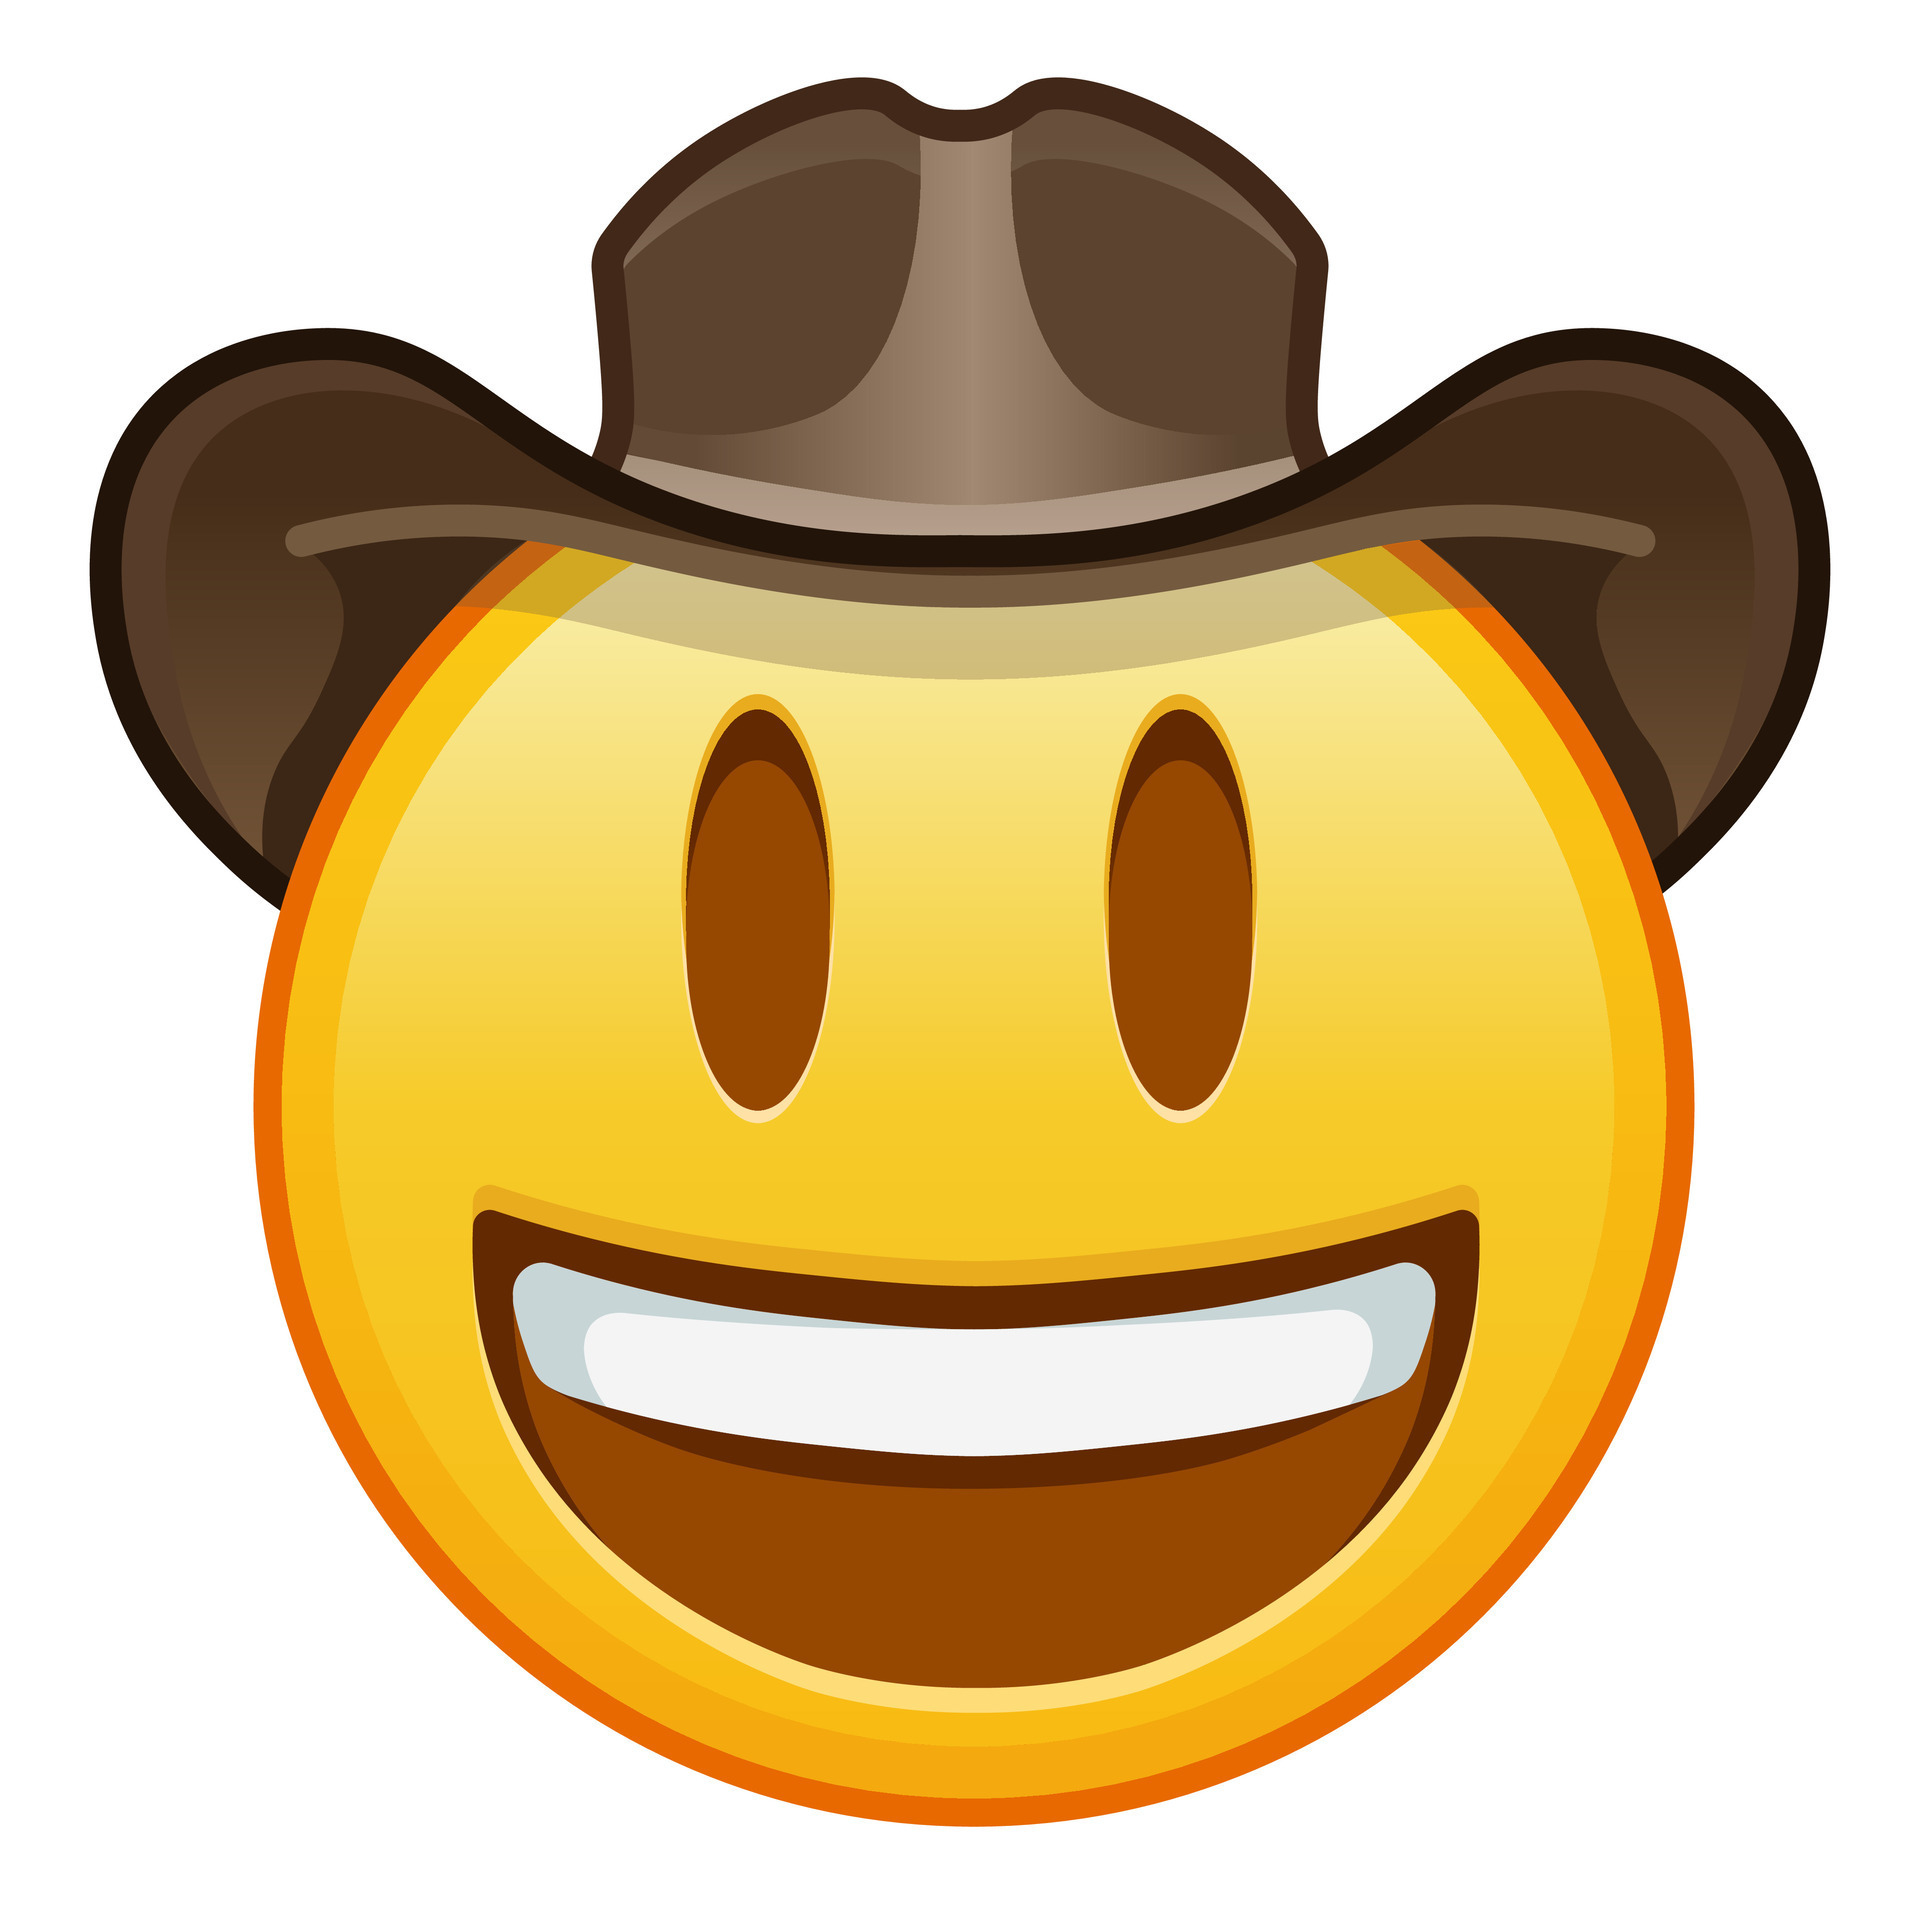 Cowboy hat face Large size of yellow emoji smile 33945289 Vector Art at ...